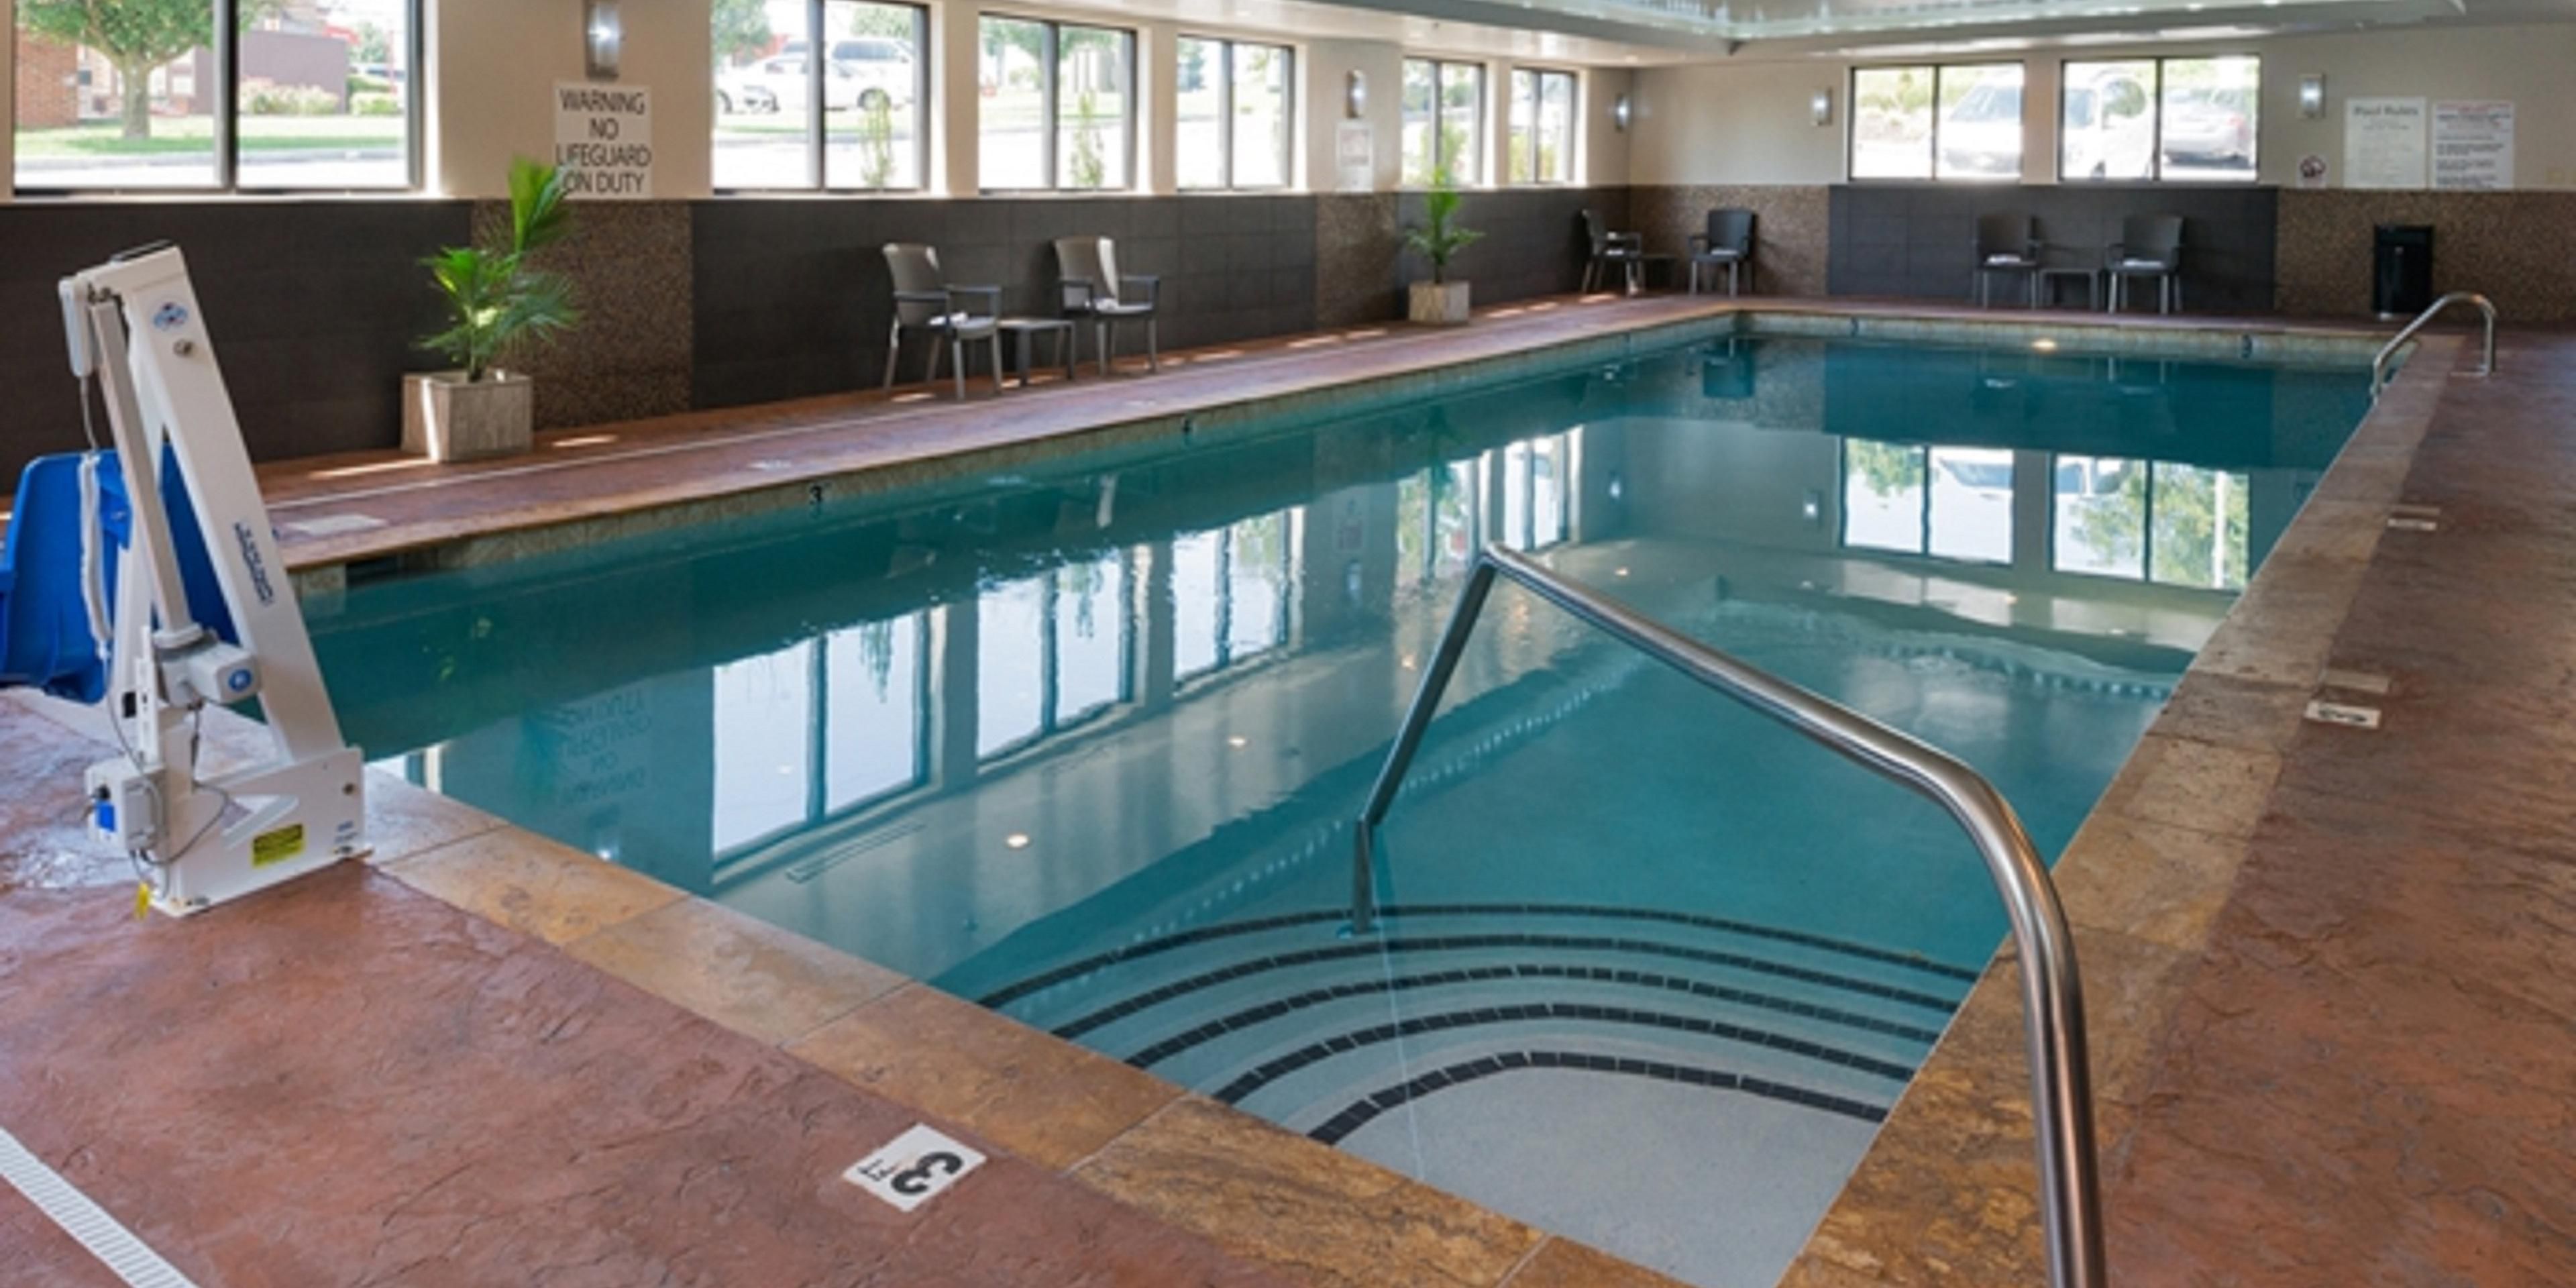 Come and enjoy our heated indoor pool! Open from 9am to 10pm.